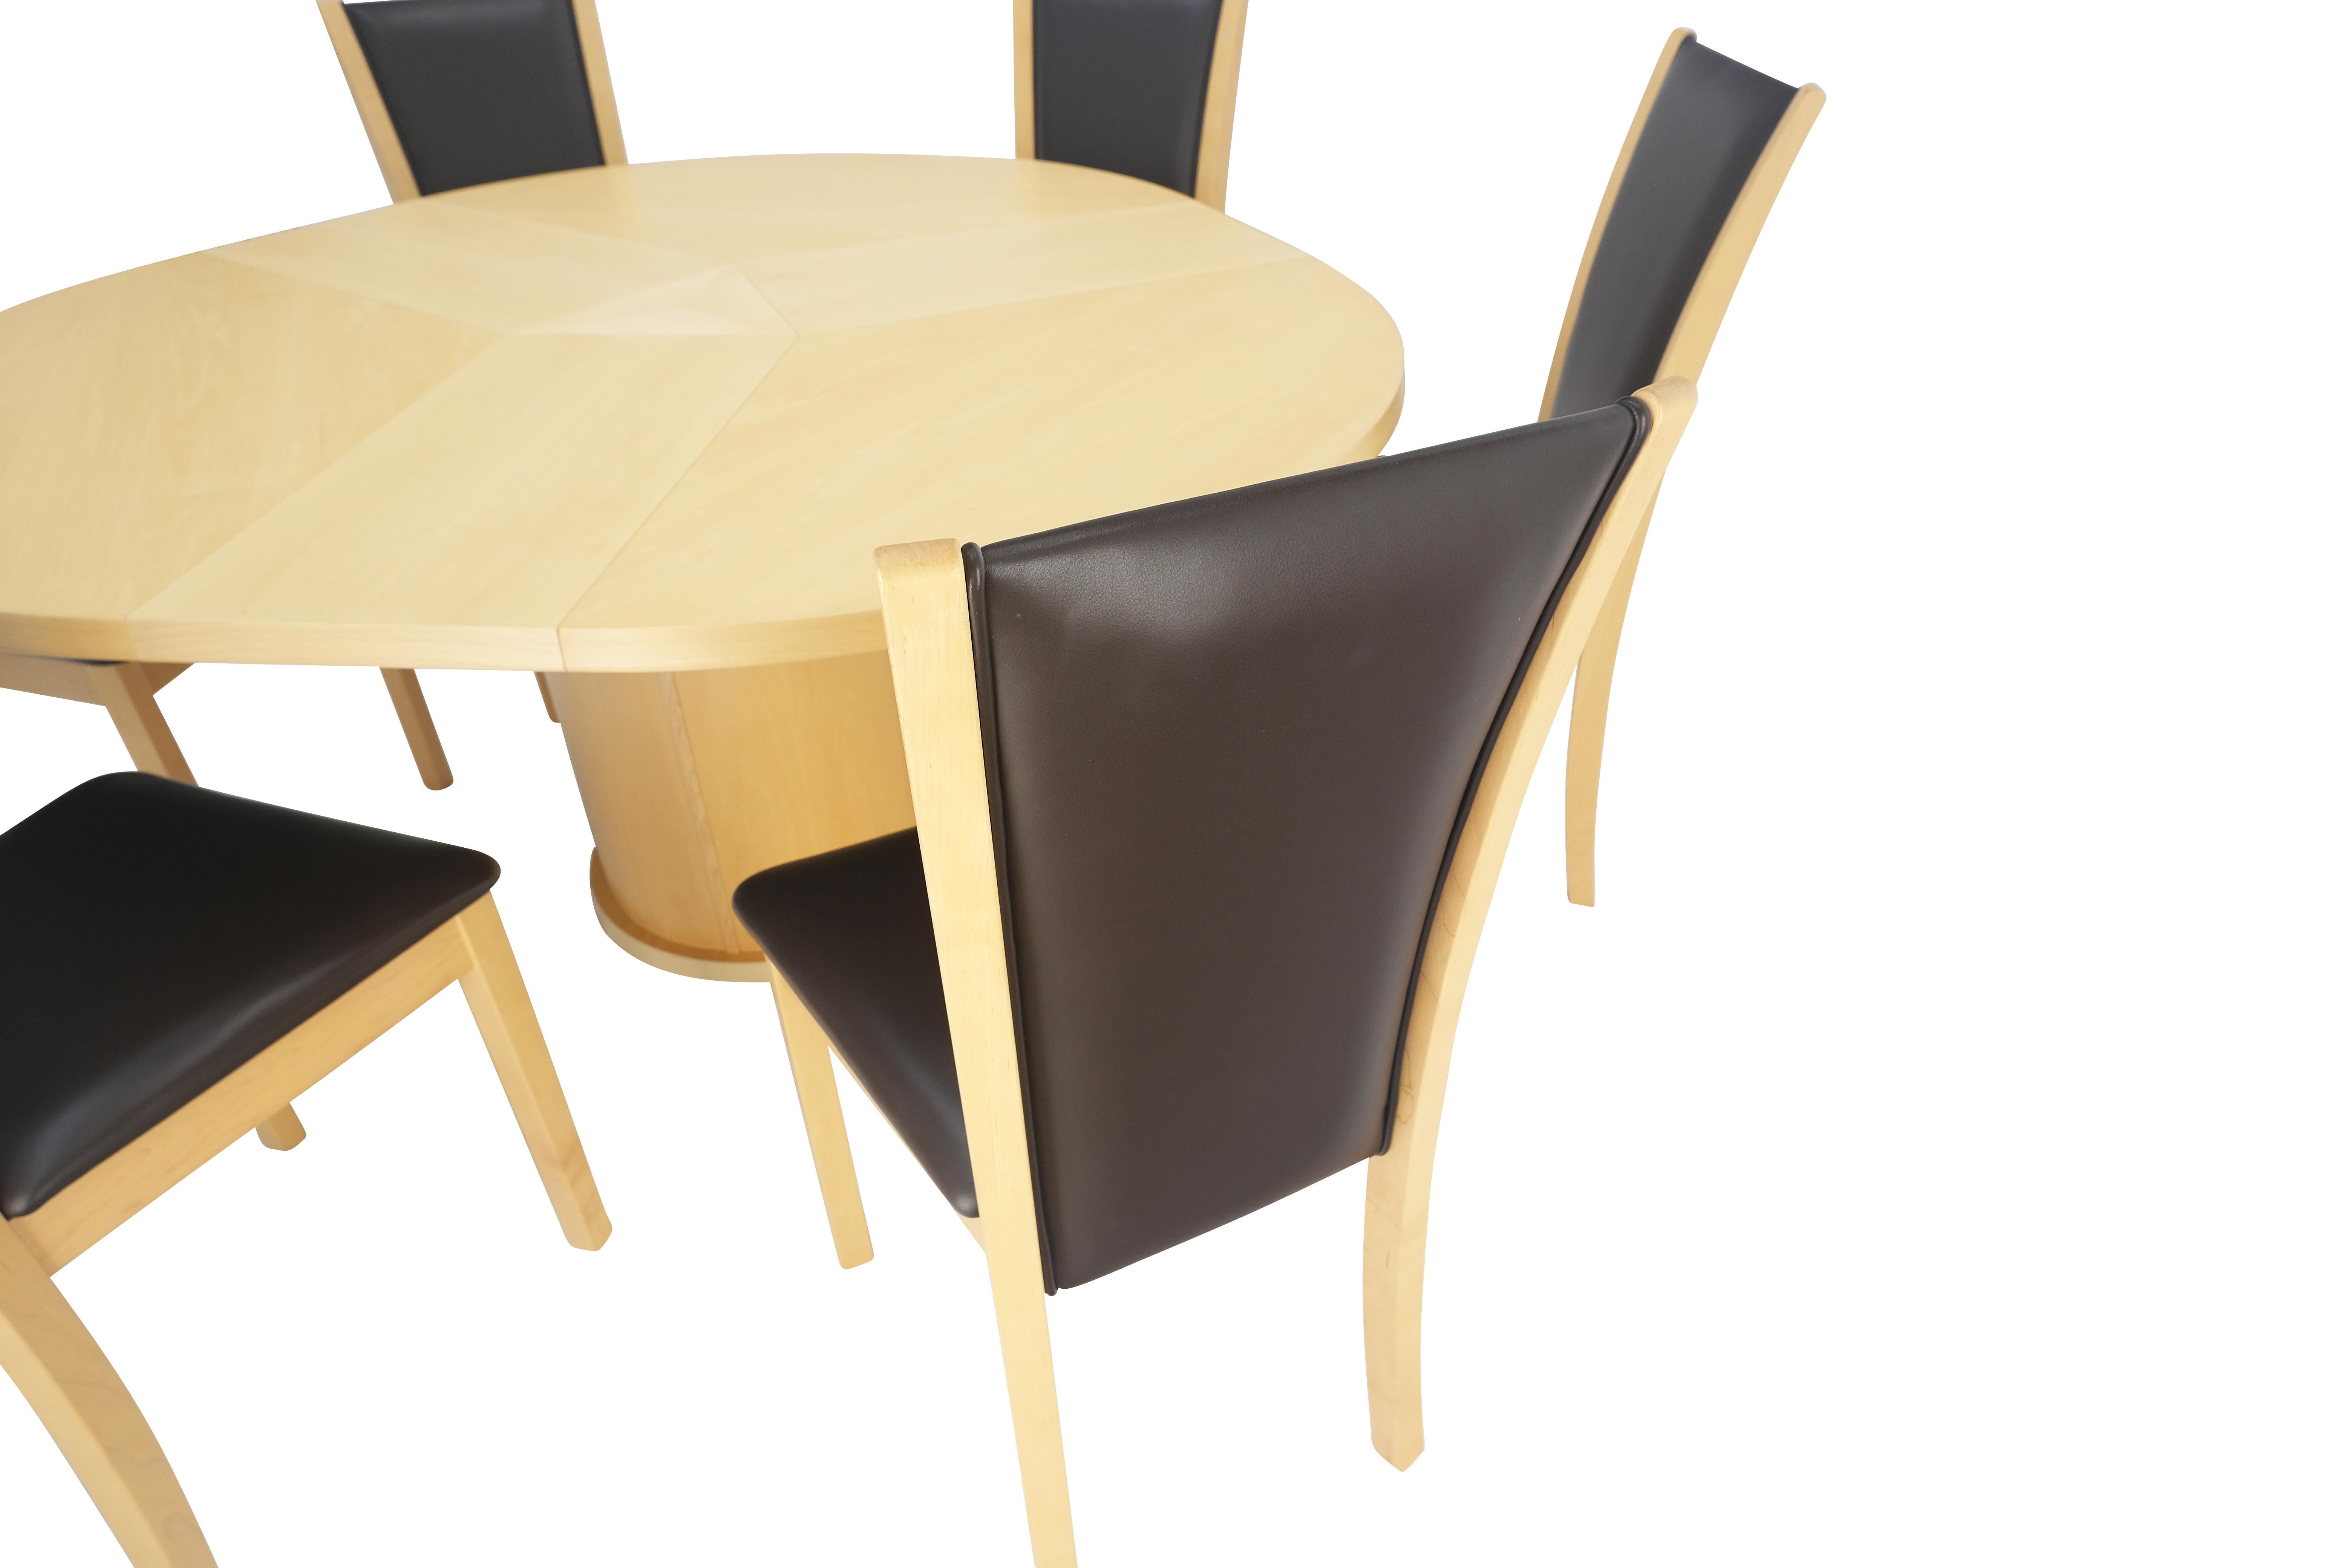 6 seater round dining table size